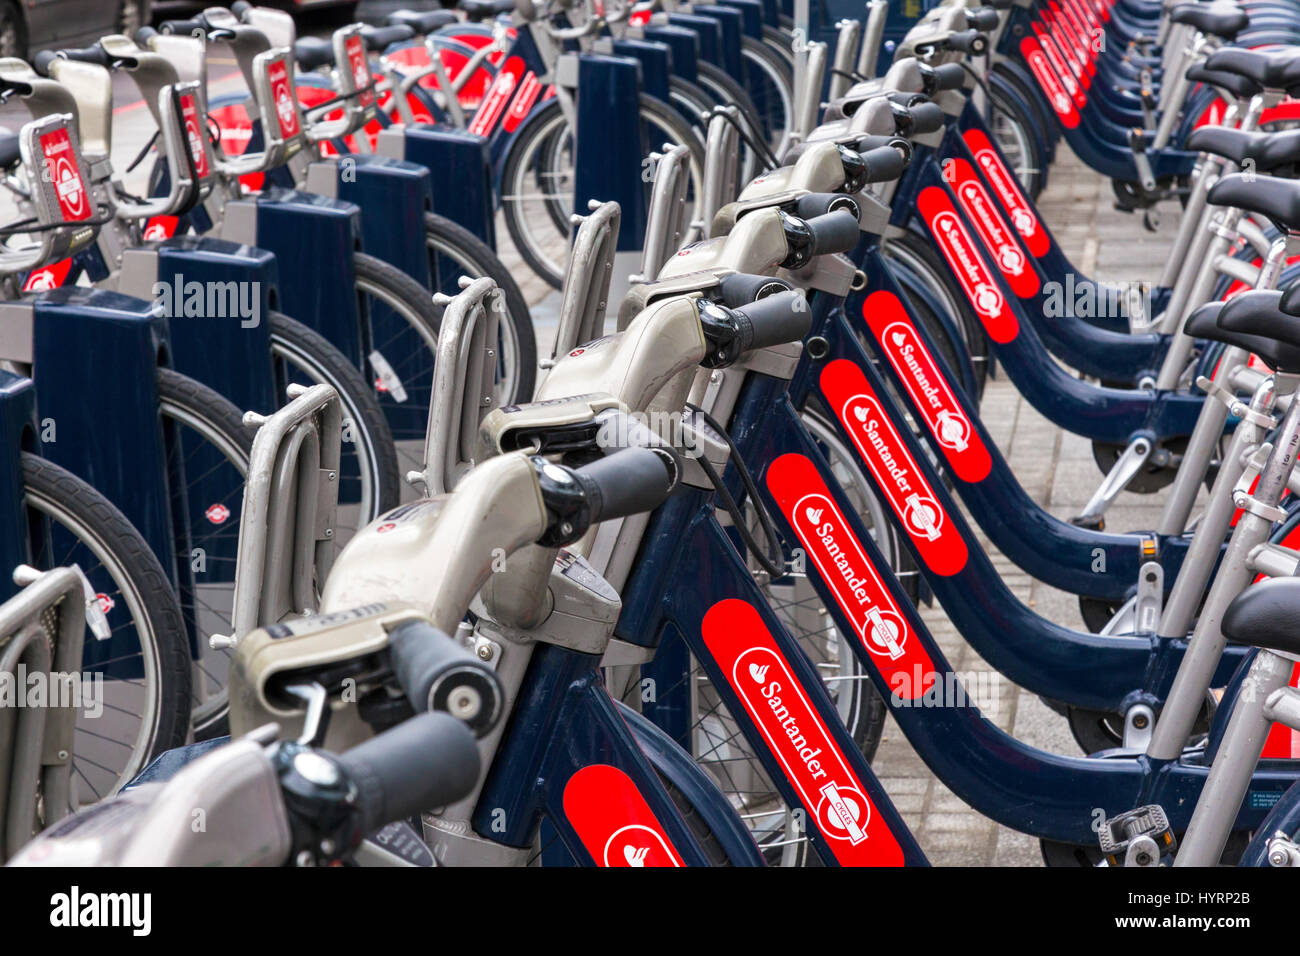 Bicycle sharing scheme, central London, England, UK Stock Photo